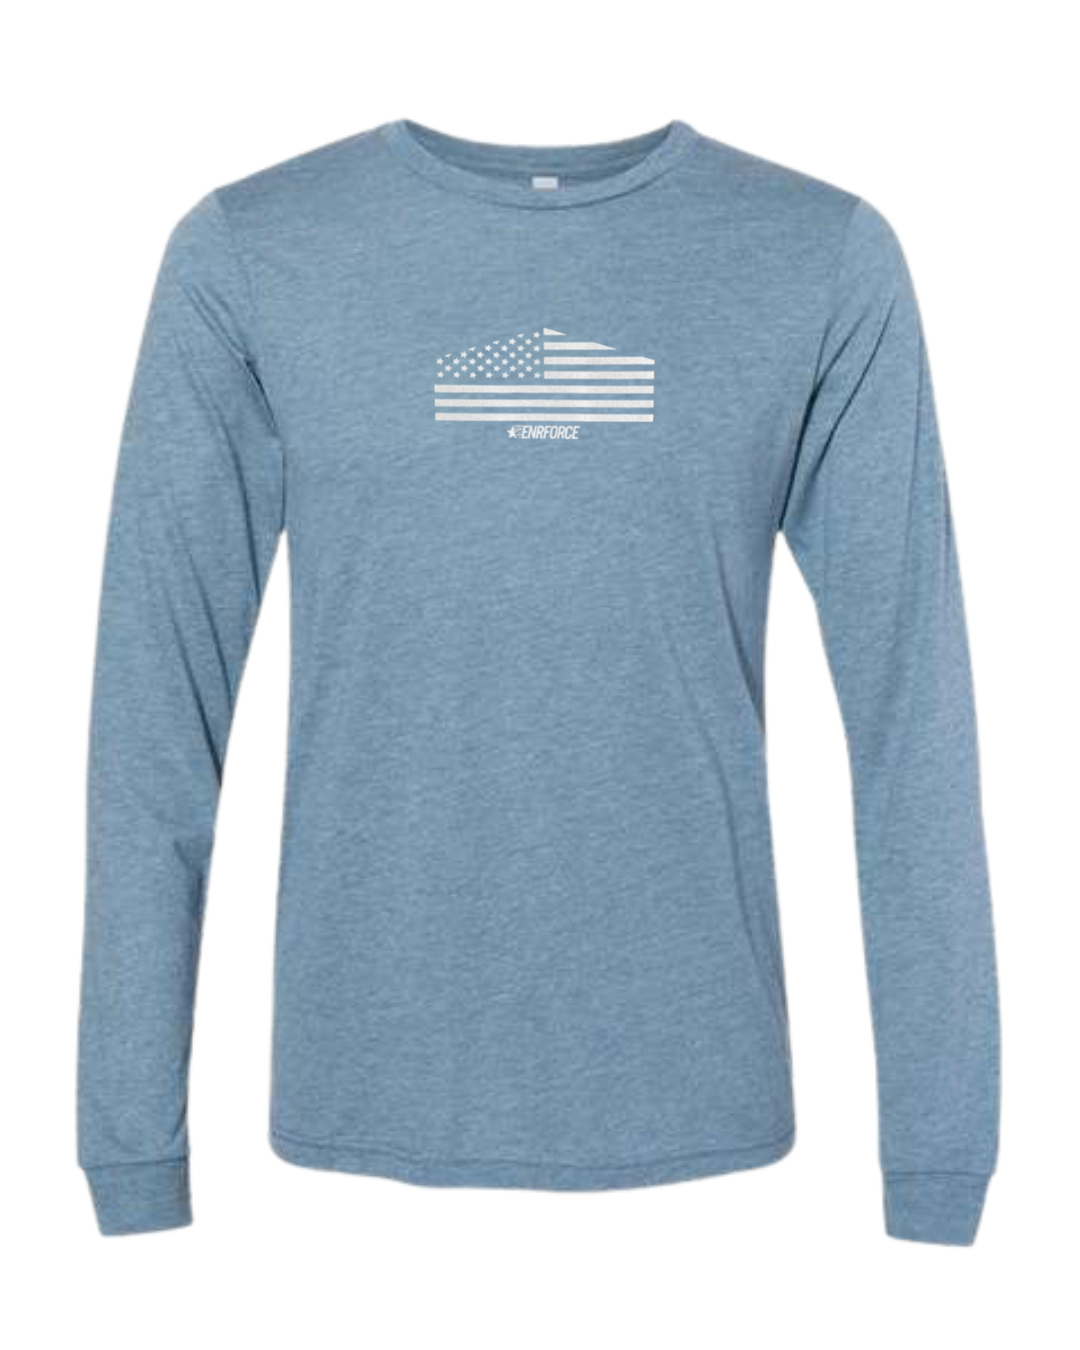 Stars and Stripes Long Sleeve